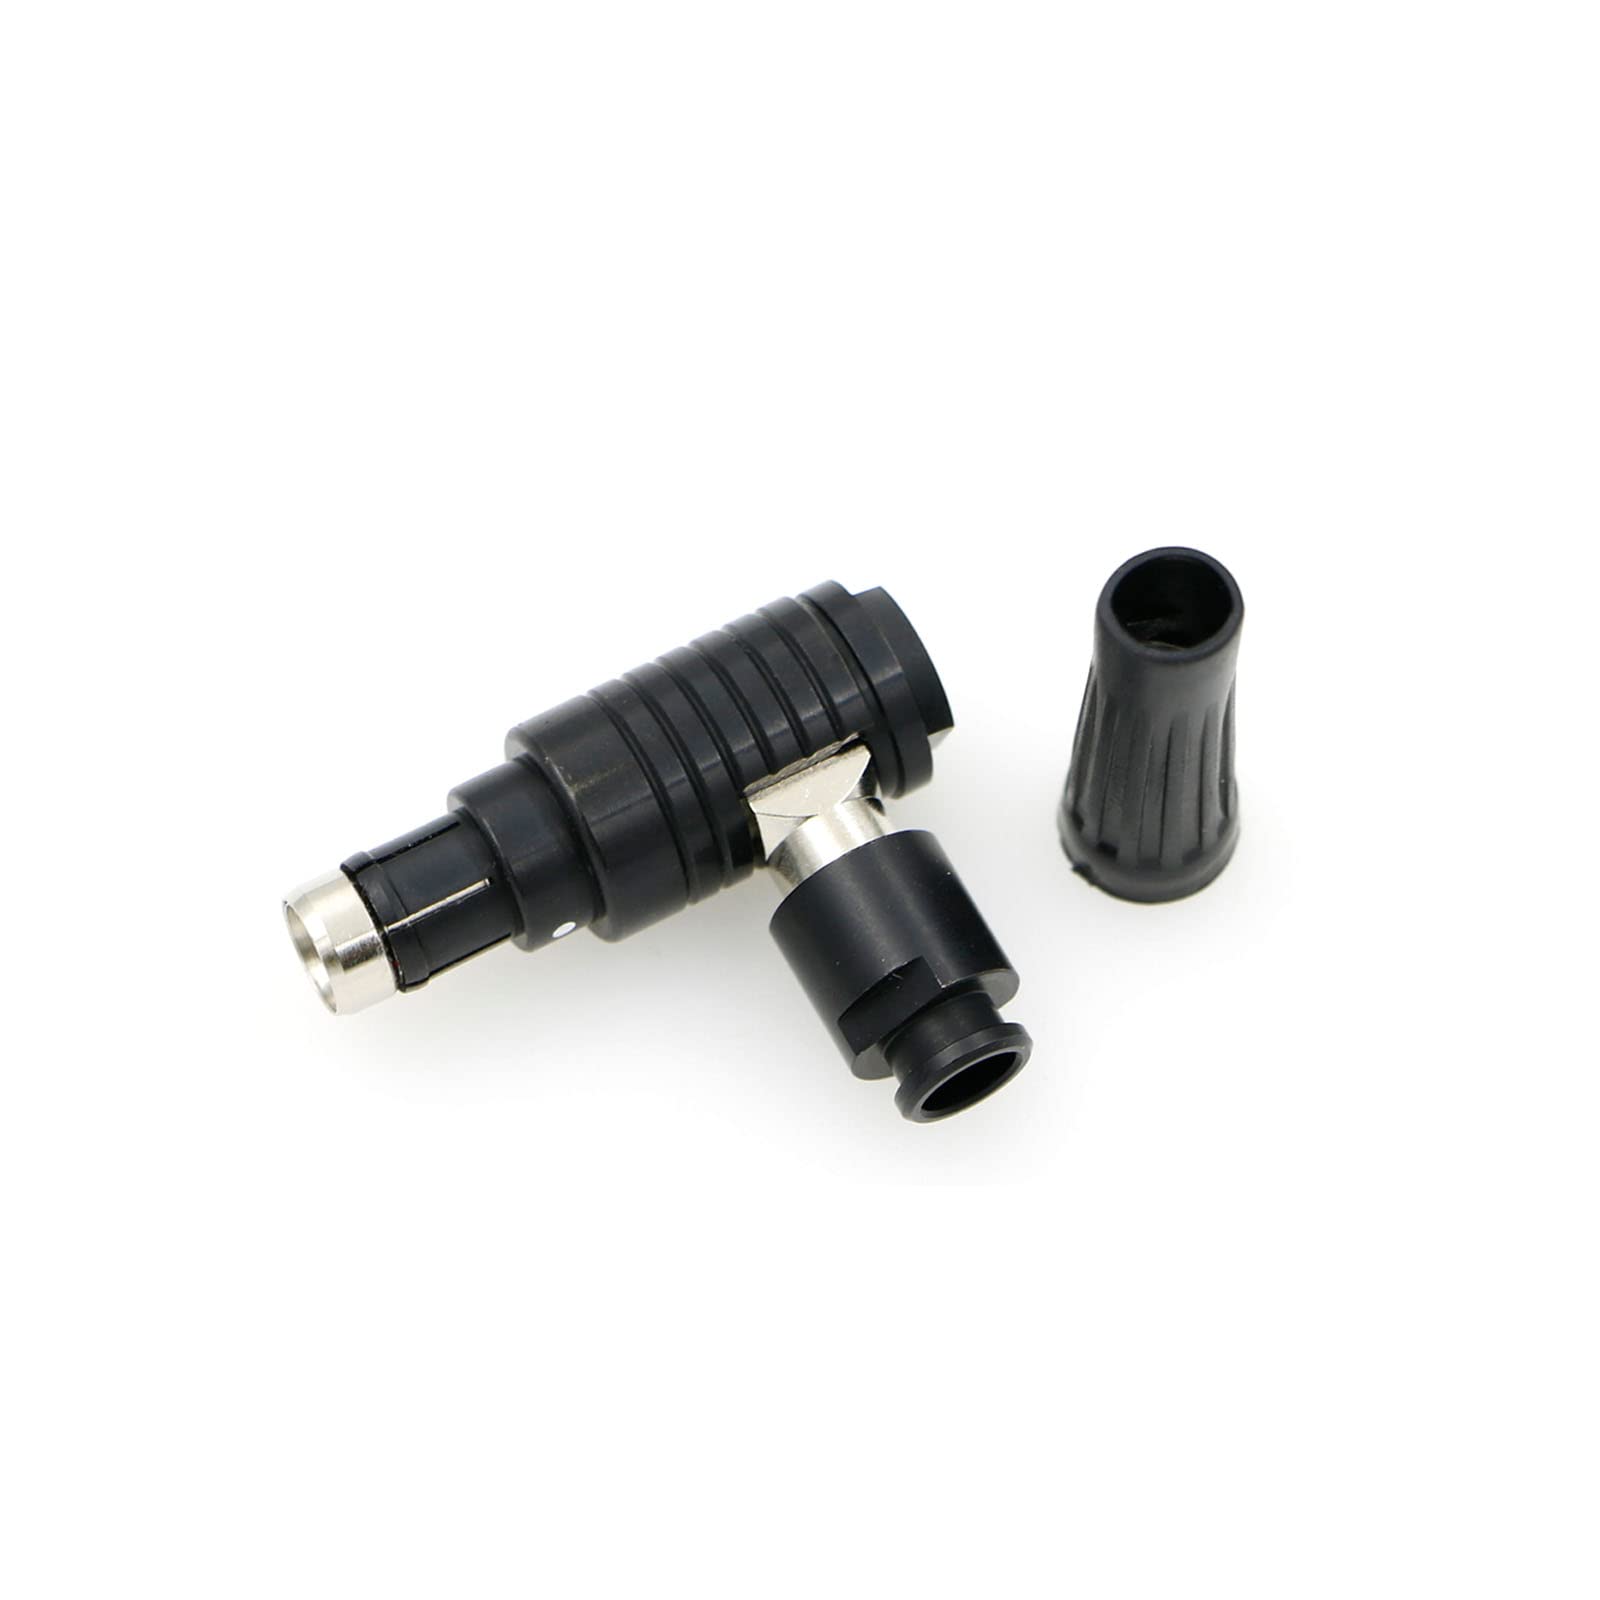 Alvin’s Cables Compatible Fischer S102 3 Pin Male Right Angle Connector for ARRI Alexa, RED DSMC2, for Sony Venice RS 3 Pin Plug